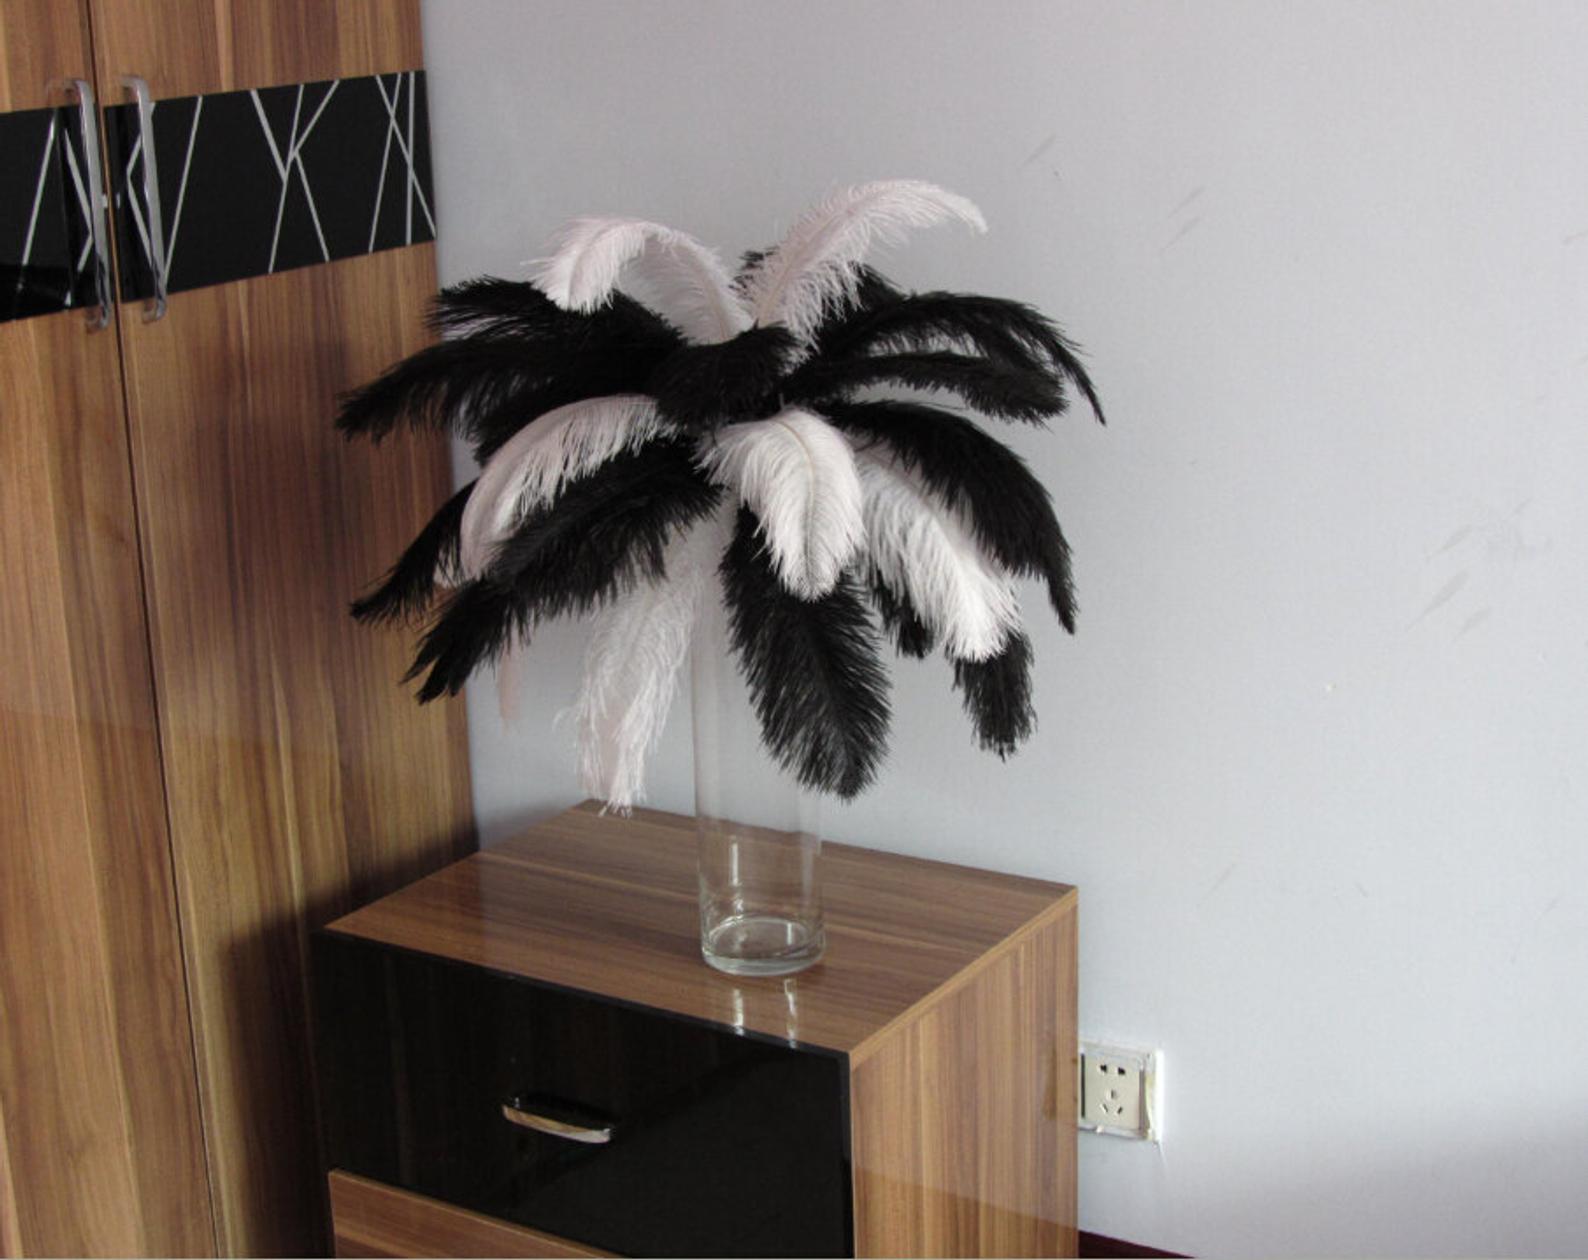 50pieces 22-24inch White ostrich feathers AND 50pieces 20-22inch White ostrich feathers